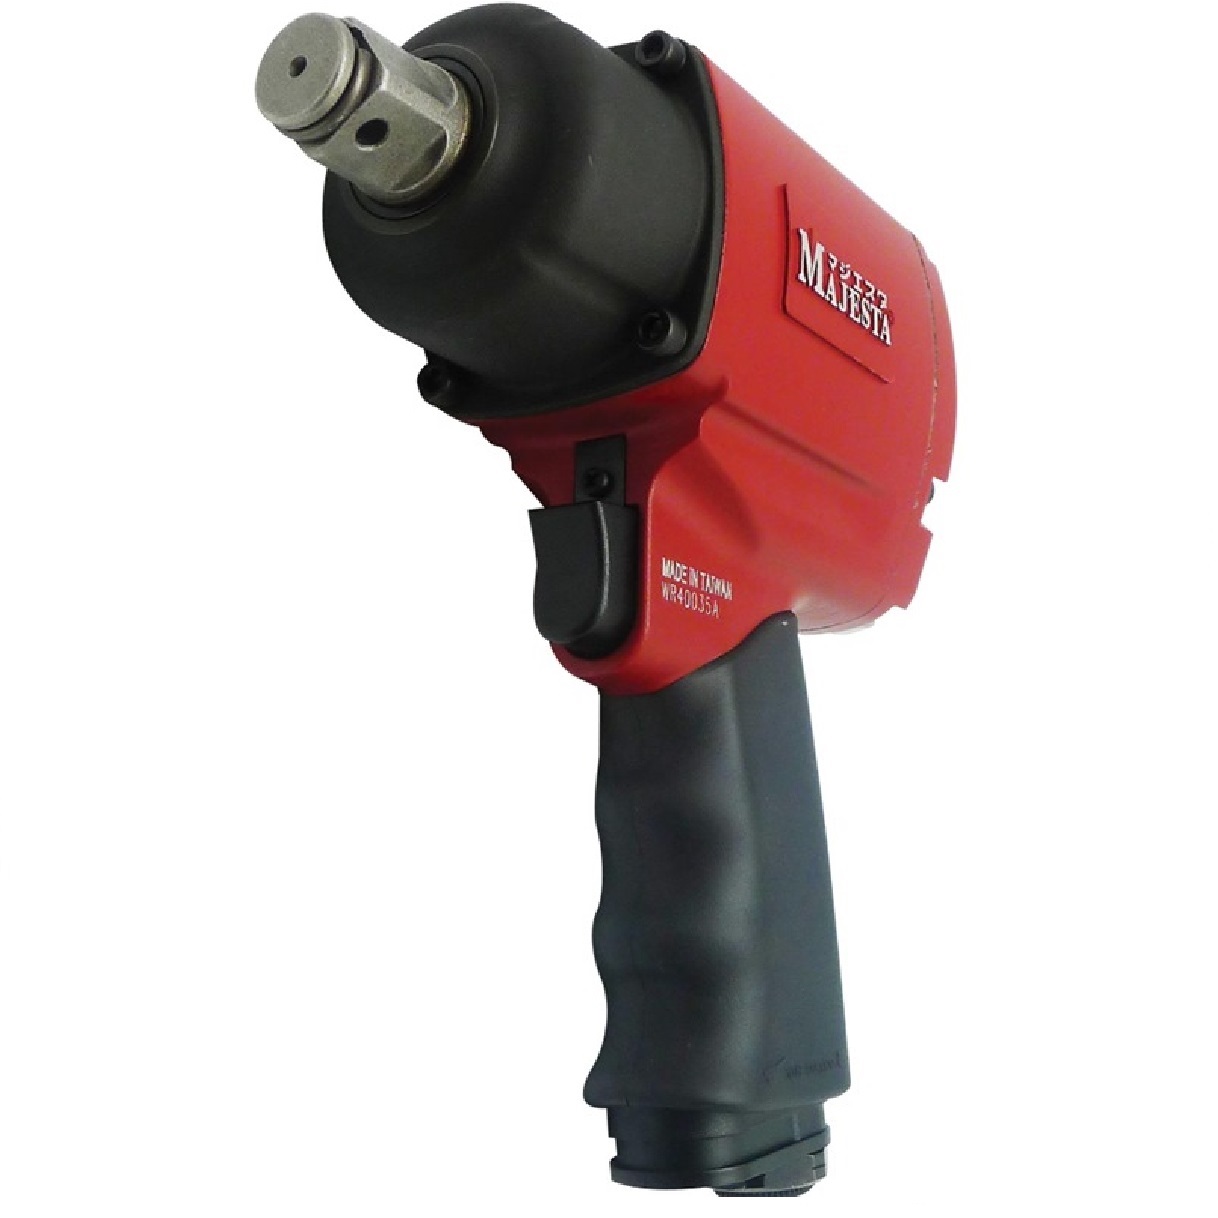 Majesta WR-6462, 3/4" Air Impact Wrench